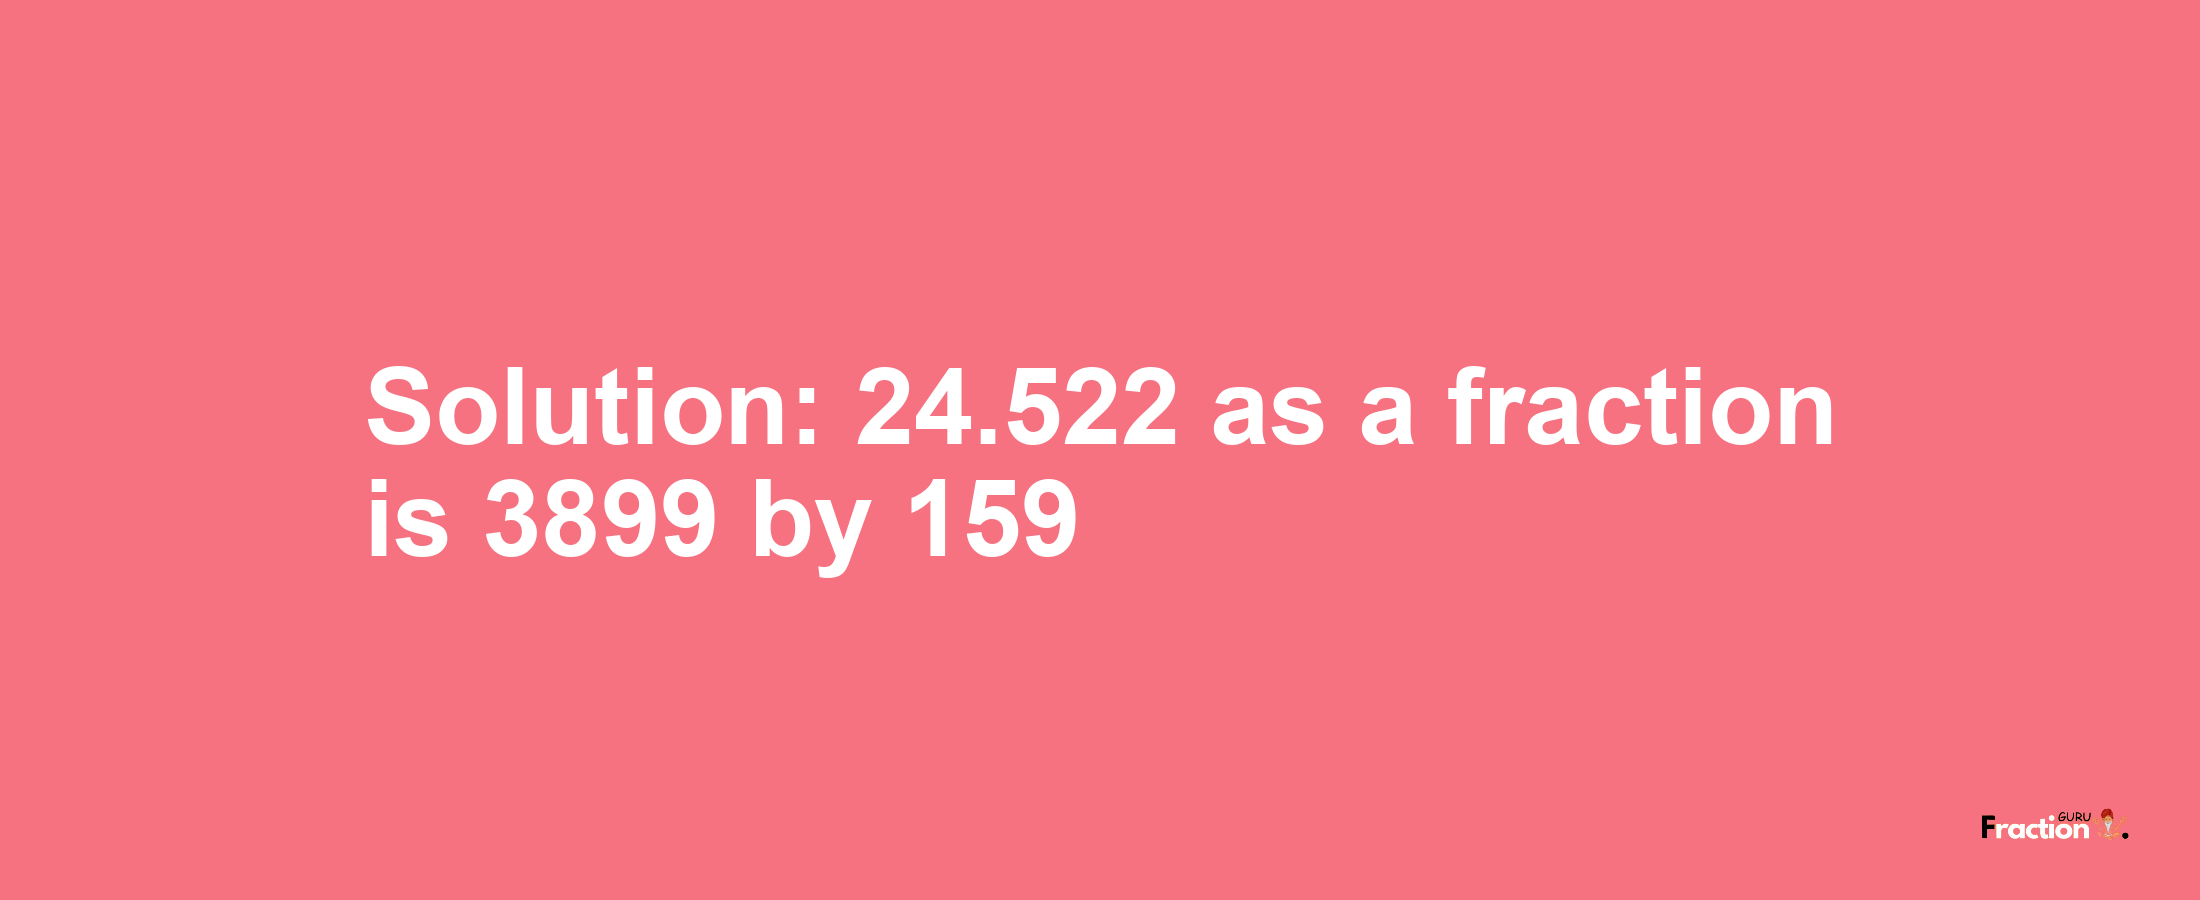 Solution:24.522 as a fraction is 3899/159